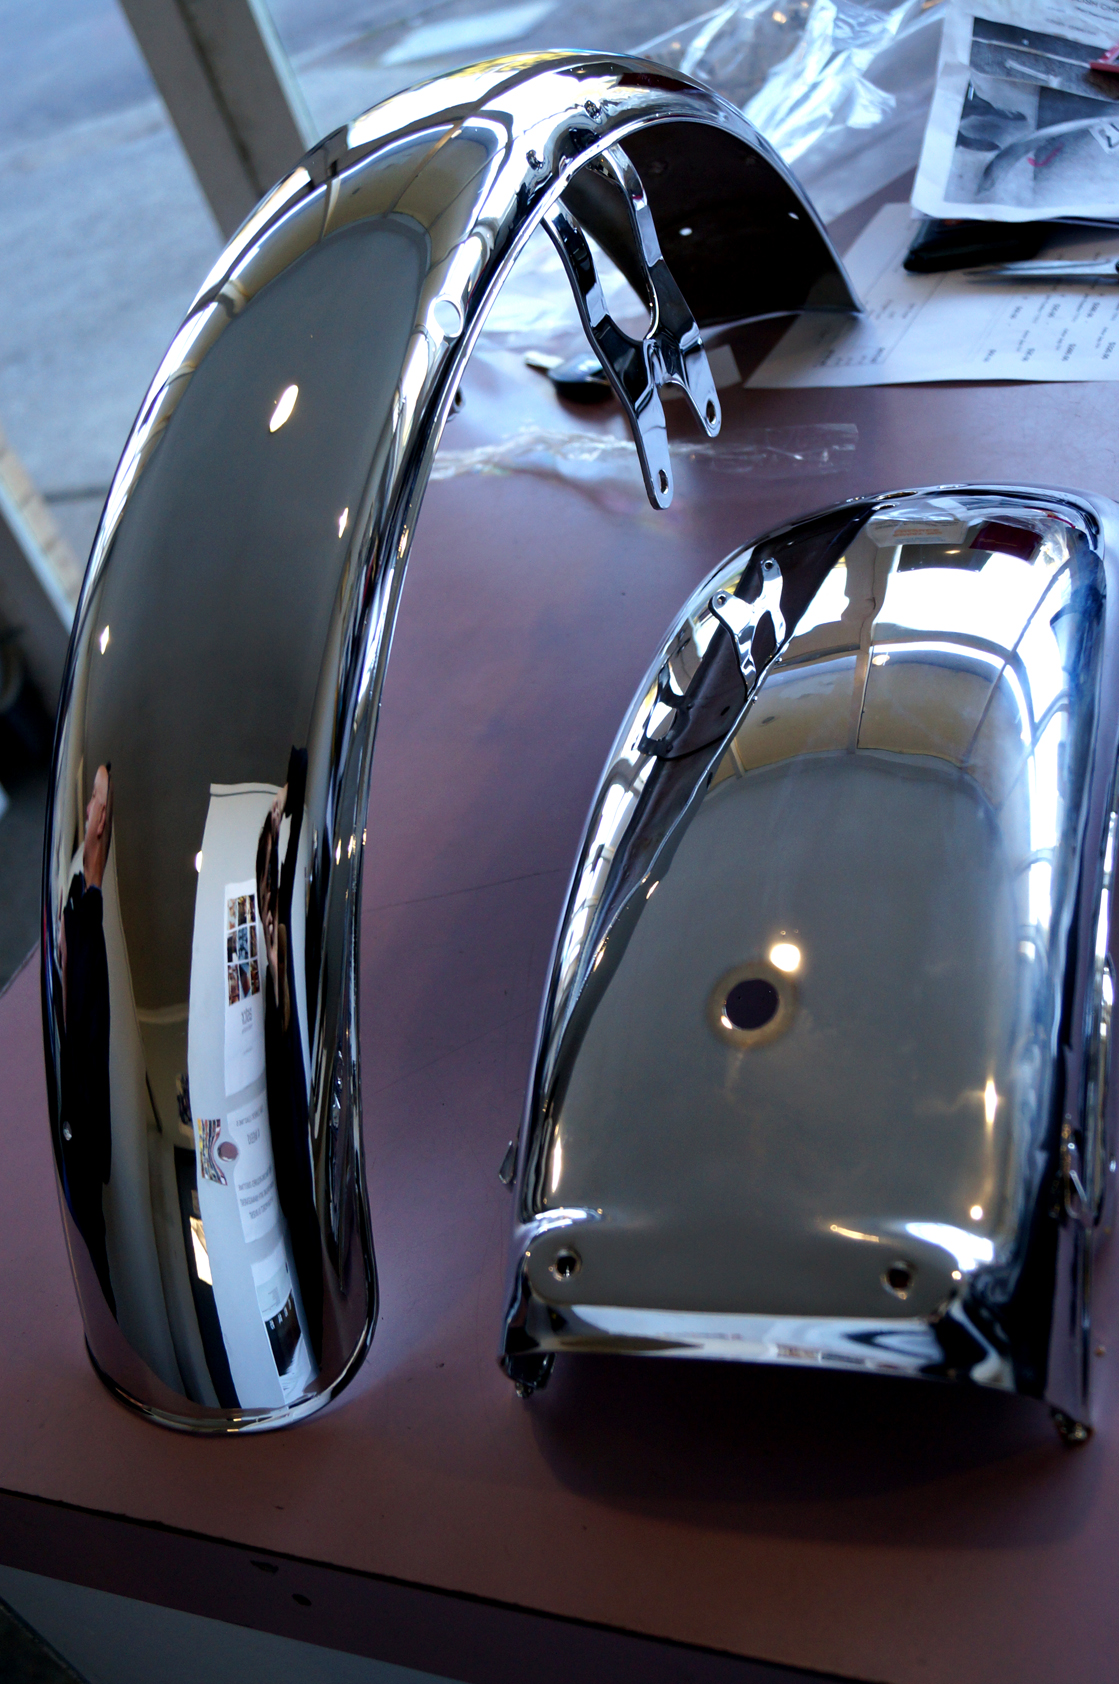 Mirror polished and chrome plated 1950s motorcycle wheel guards - finish vastly improved with heavy copper plating first